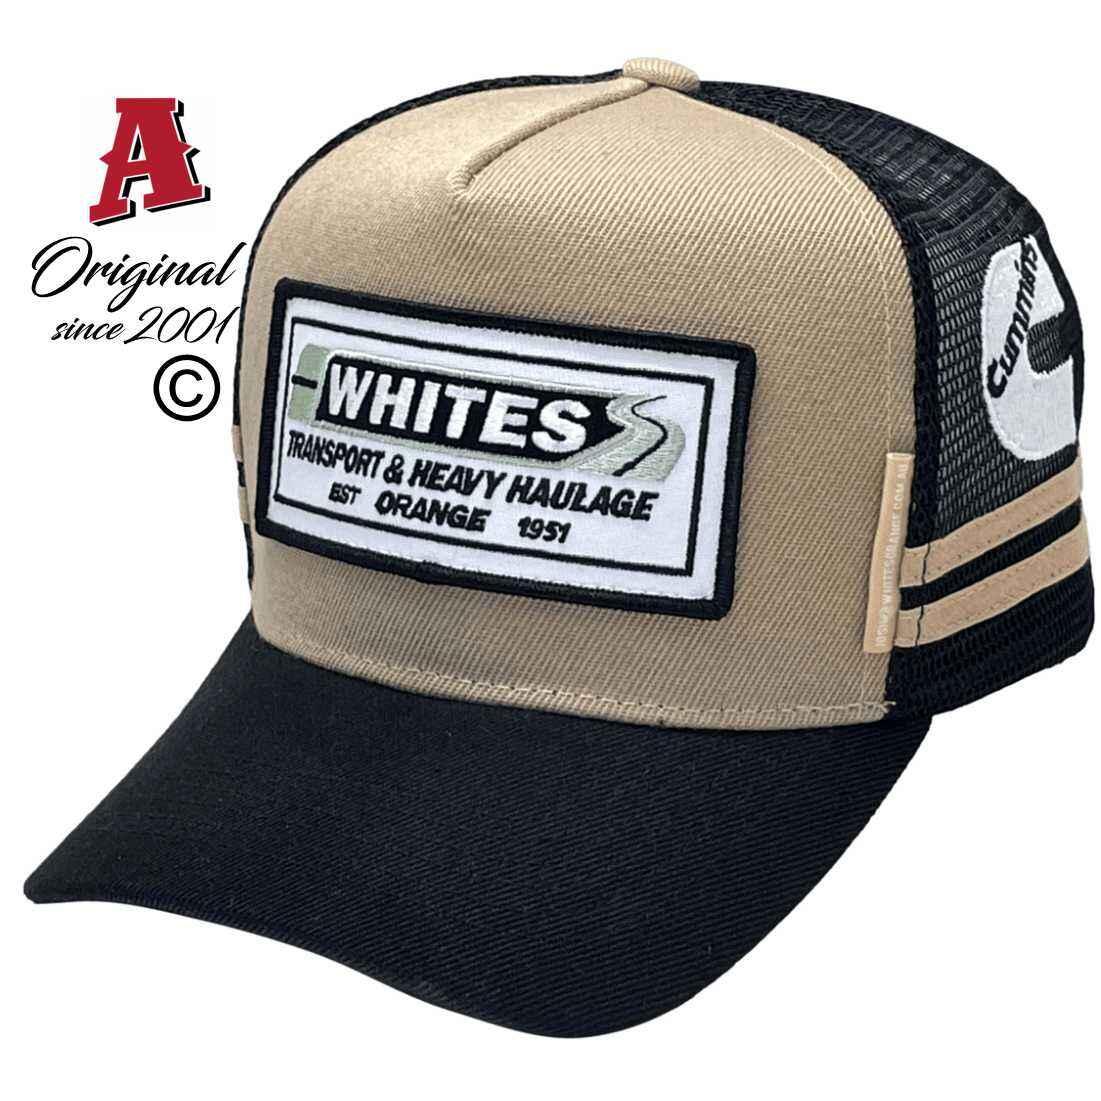 Whites Transport & Heavy Haulage in Orange, NSW offers HP Power Aussie Trucker Hats with Double SideBands, an Australian HeadFit Crown, and a Khaki Black color scheme.